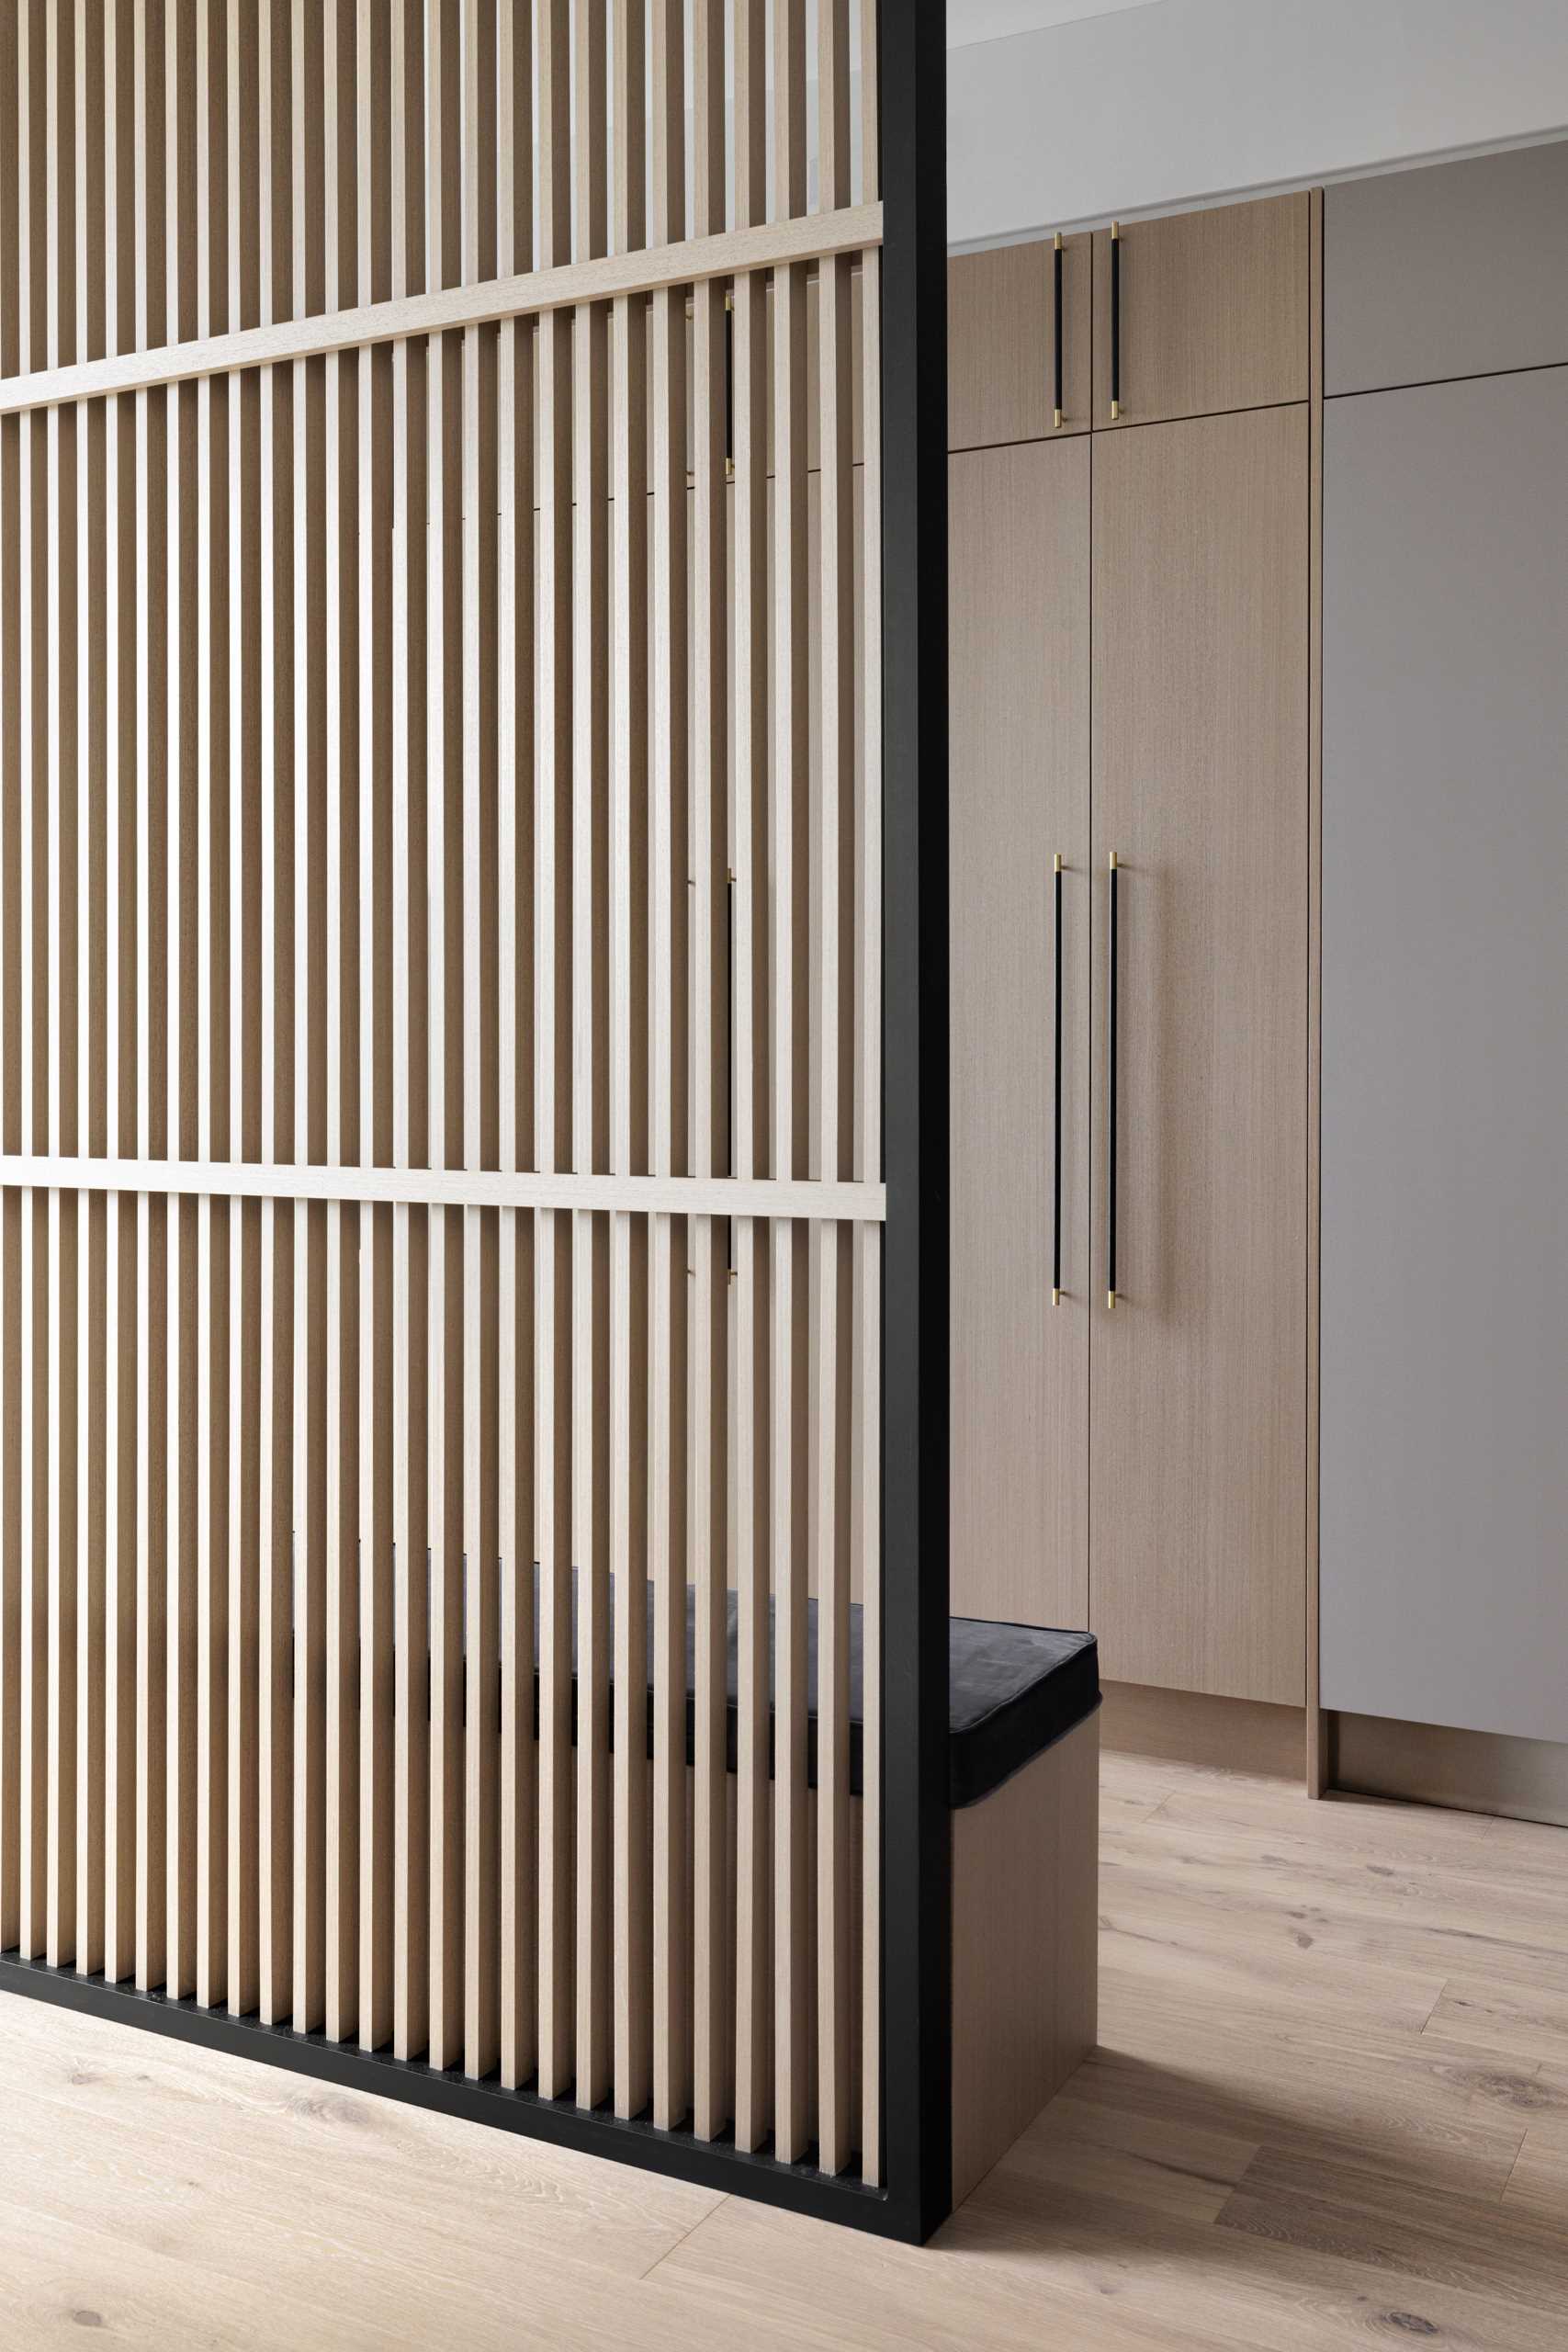 A wood slat partition creates space for a mudroom.